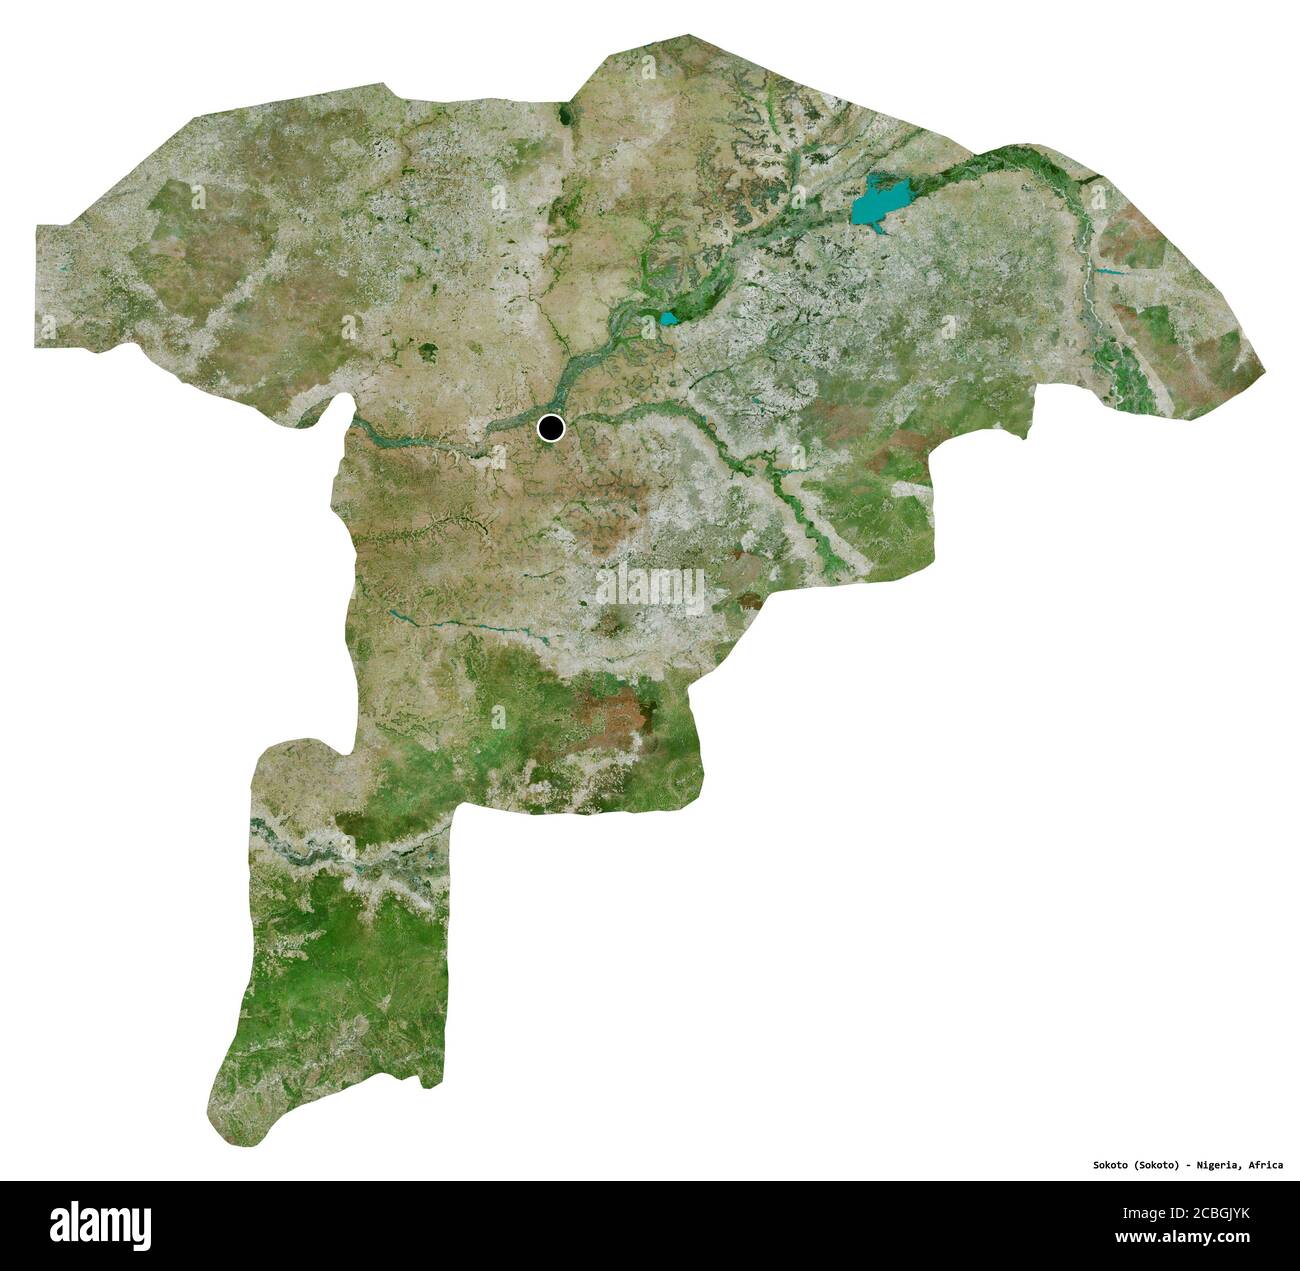 Shape of Sokoto, state of Nigeria, with its capital isolated on white background. Satellite imagery. 3D rendering Stock Photo